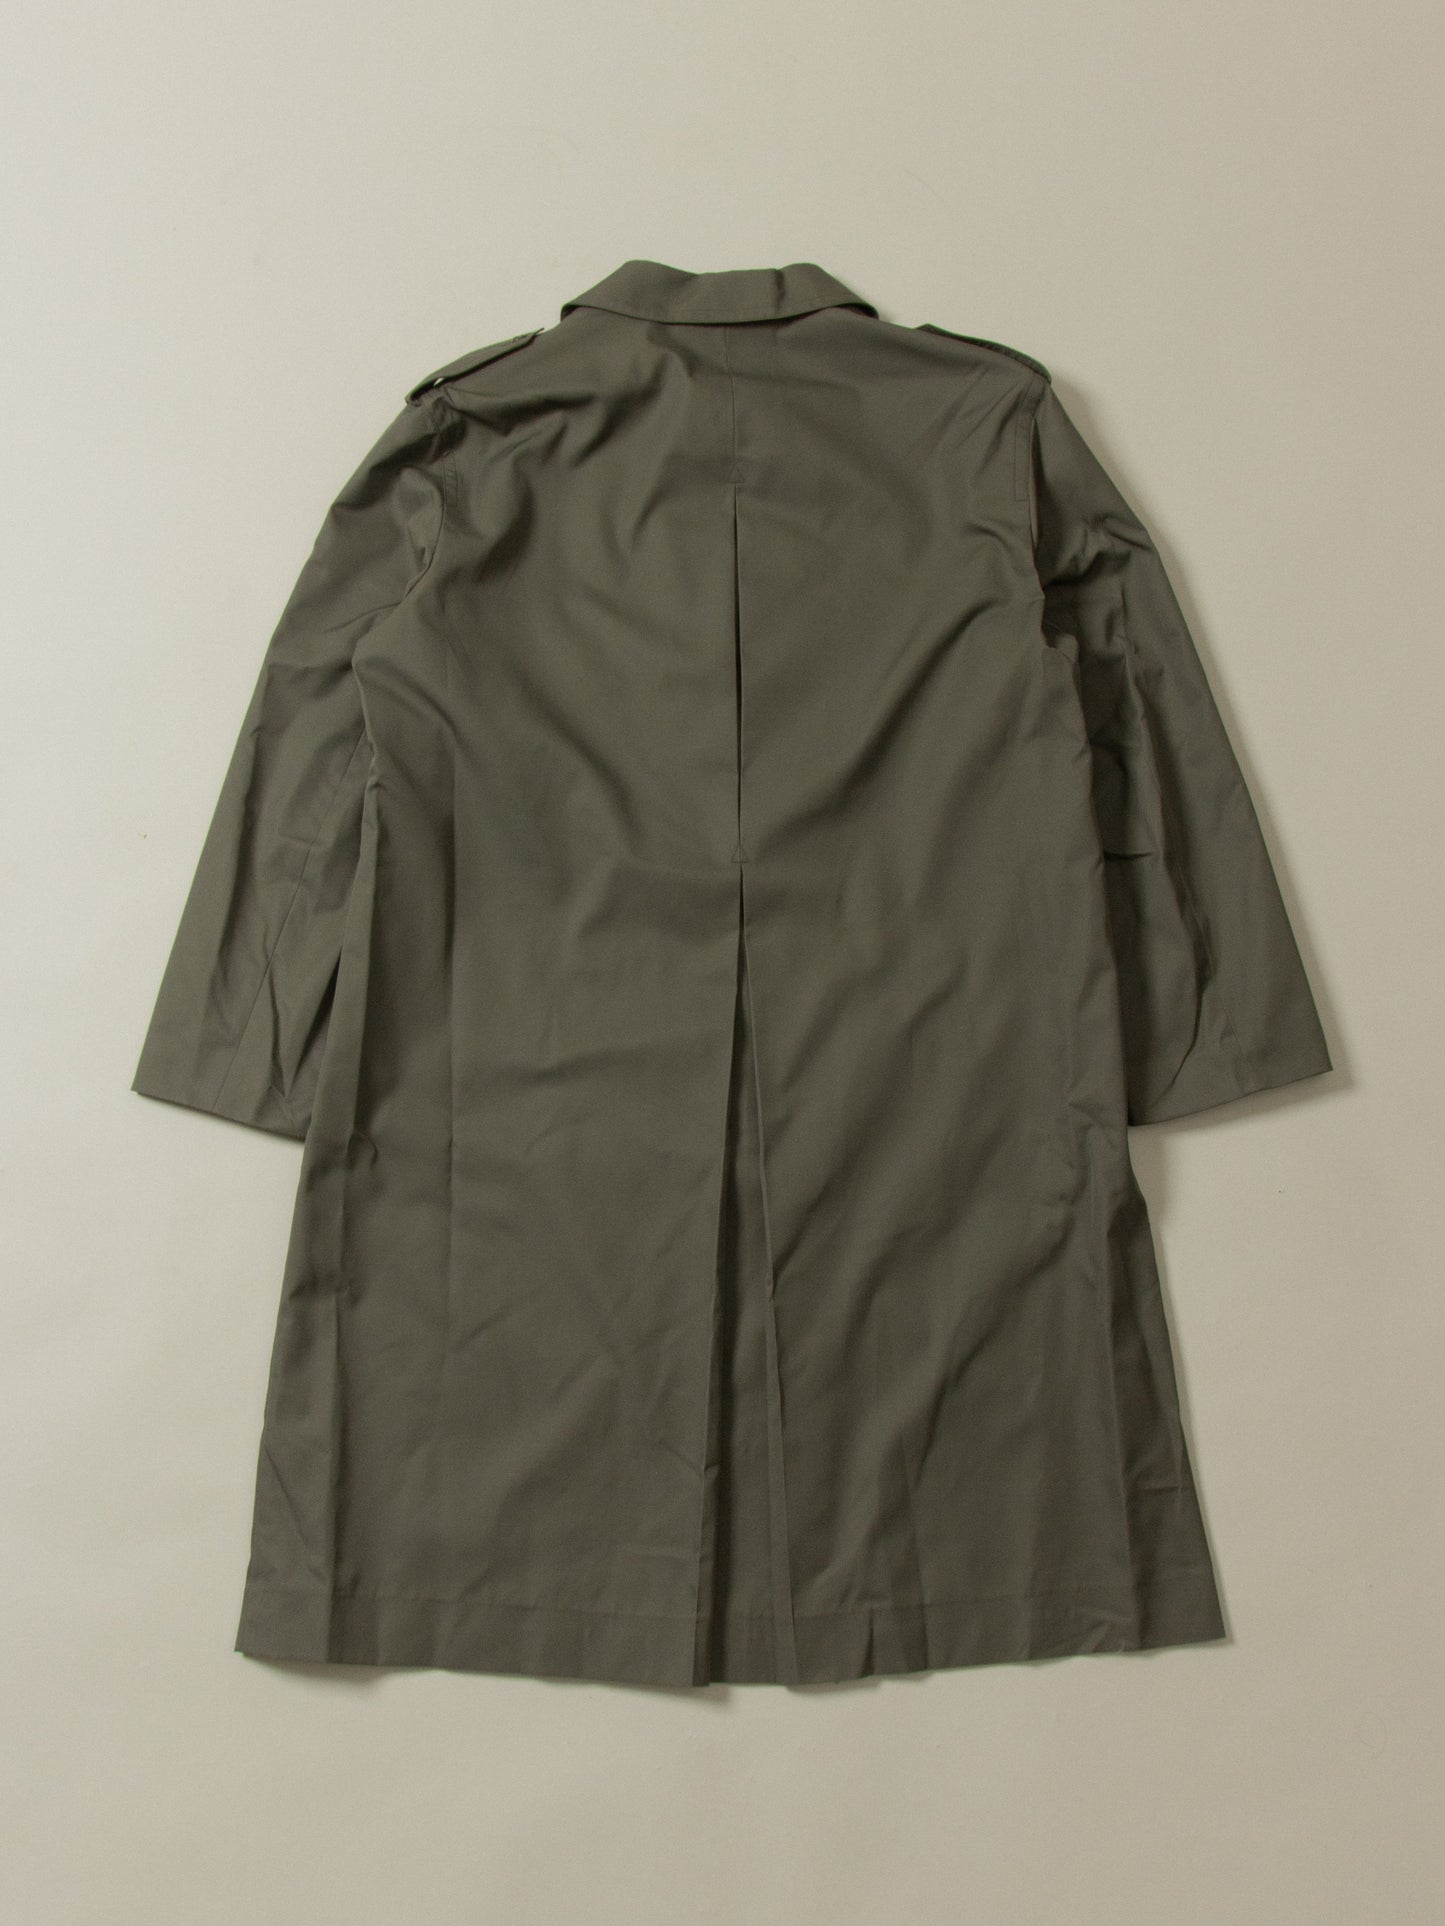 Deadstock 1990s French Army Trench Coat